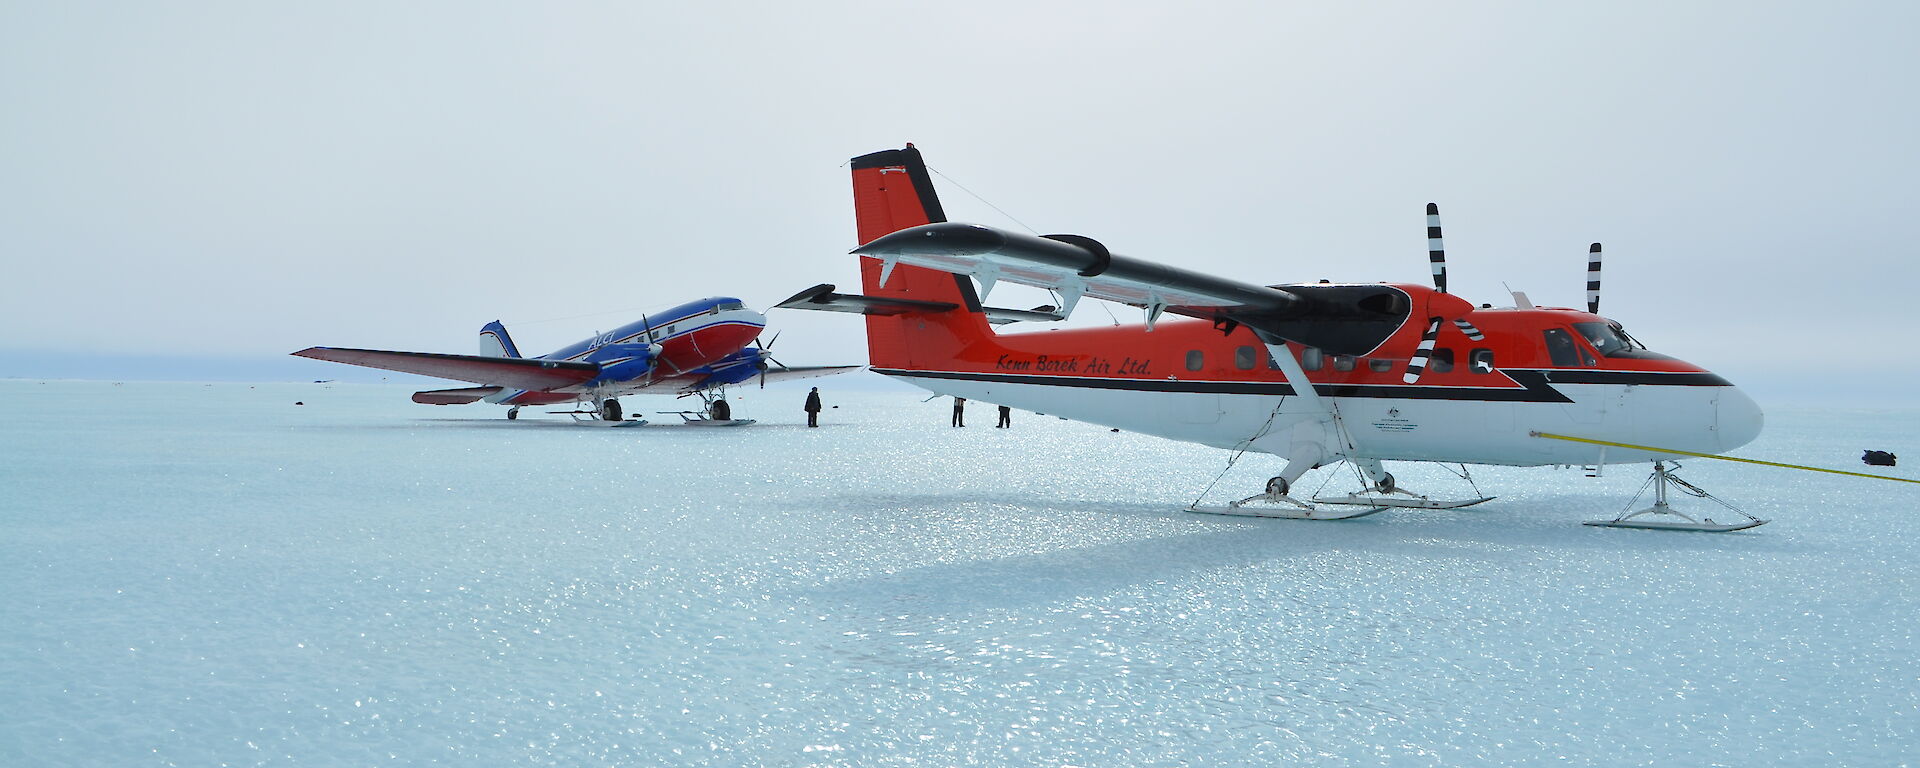 Two planes, the Basler just larger than the Twin Otter, parked next to each other.